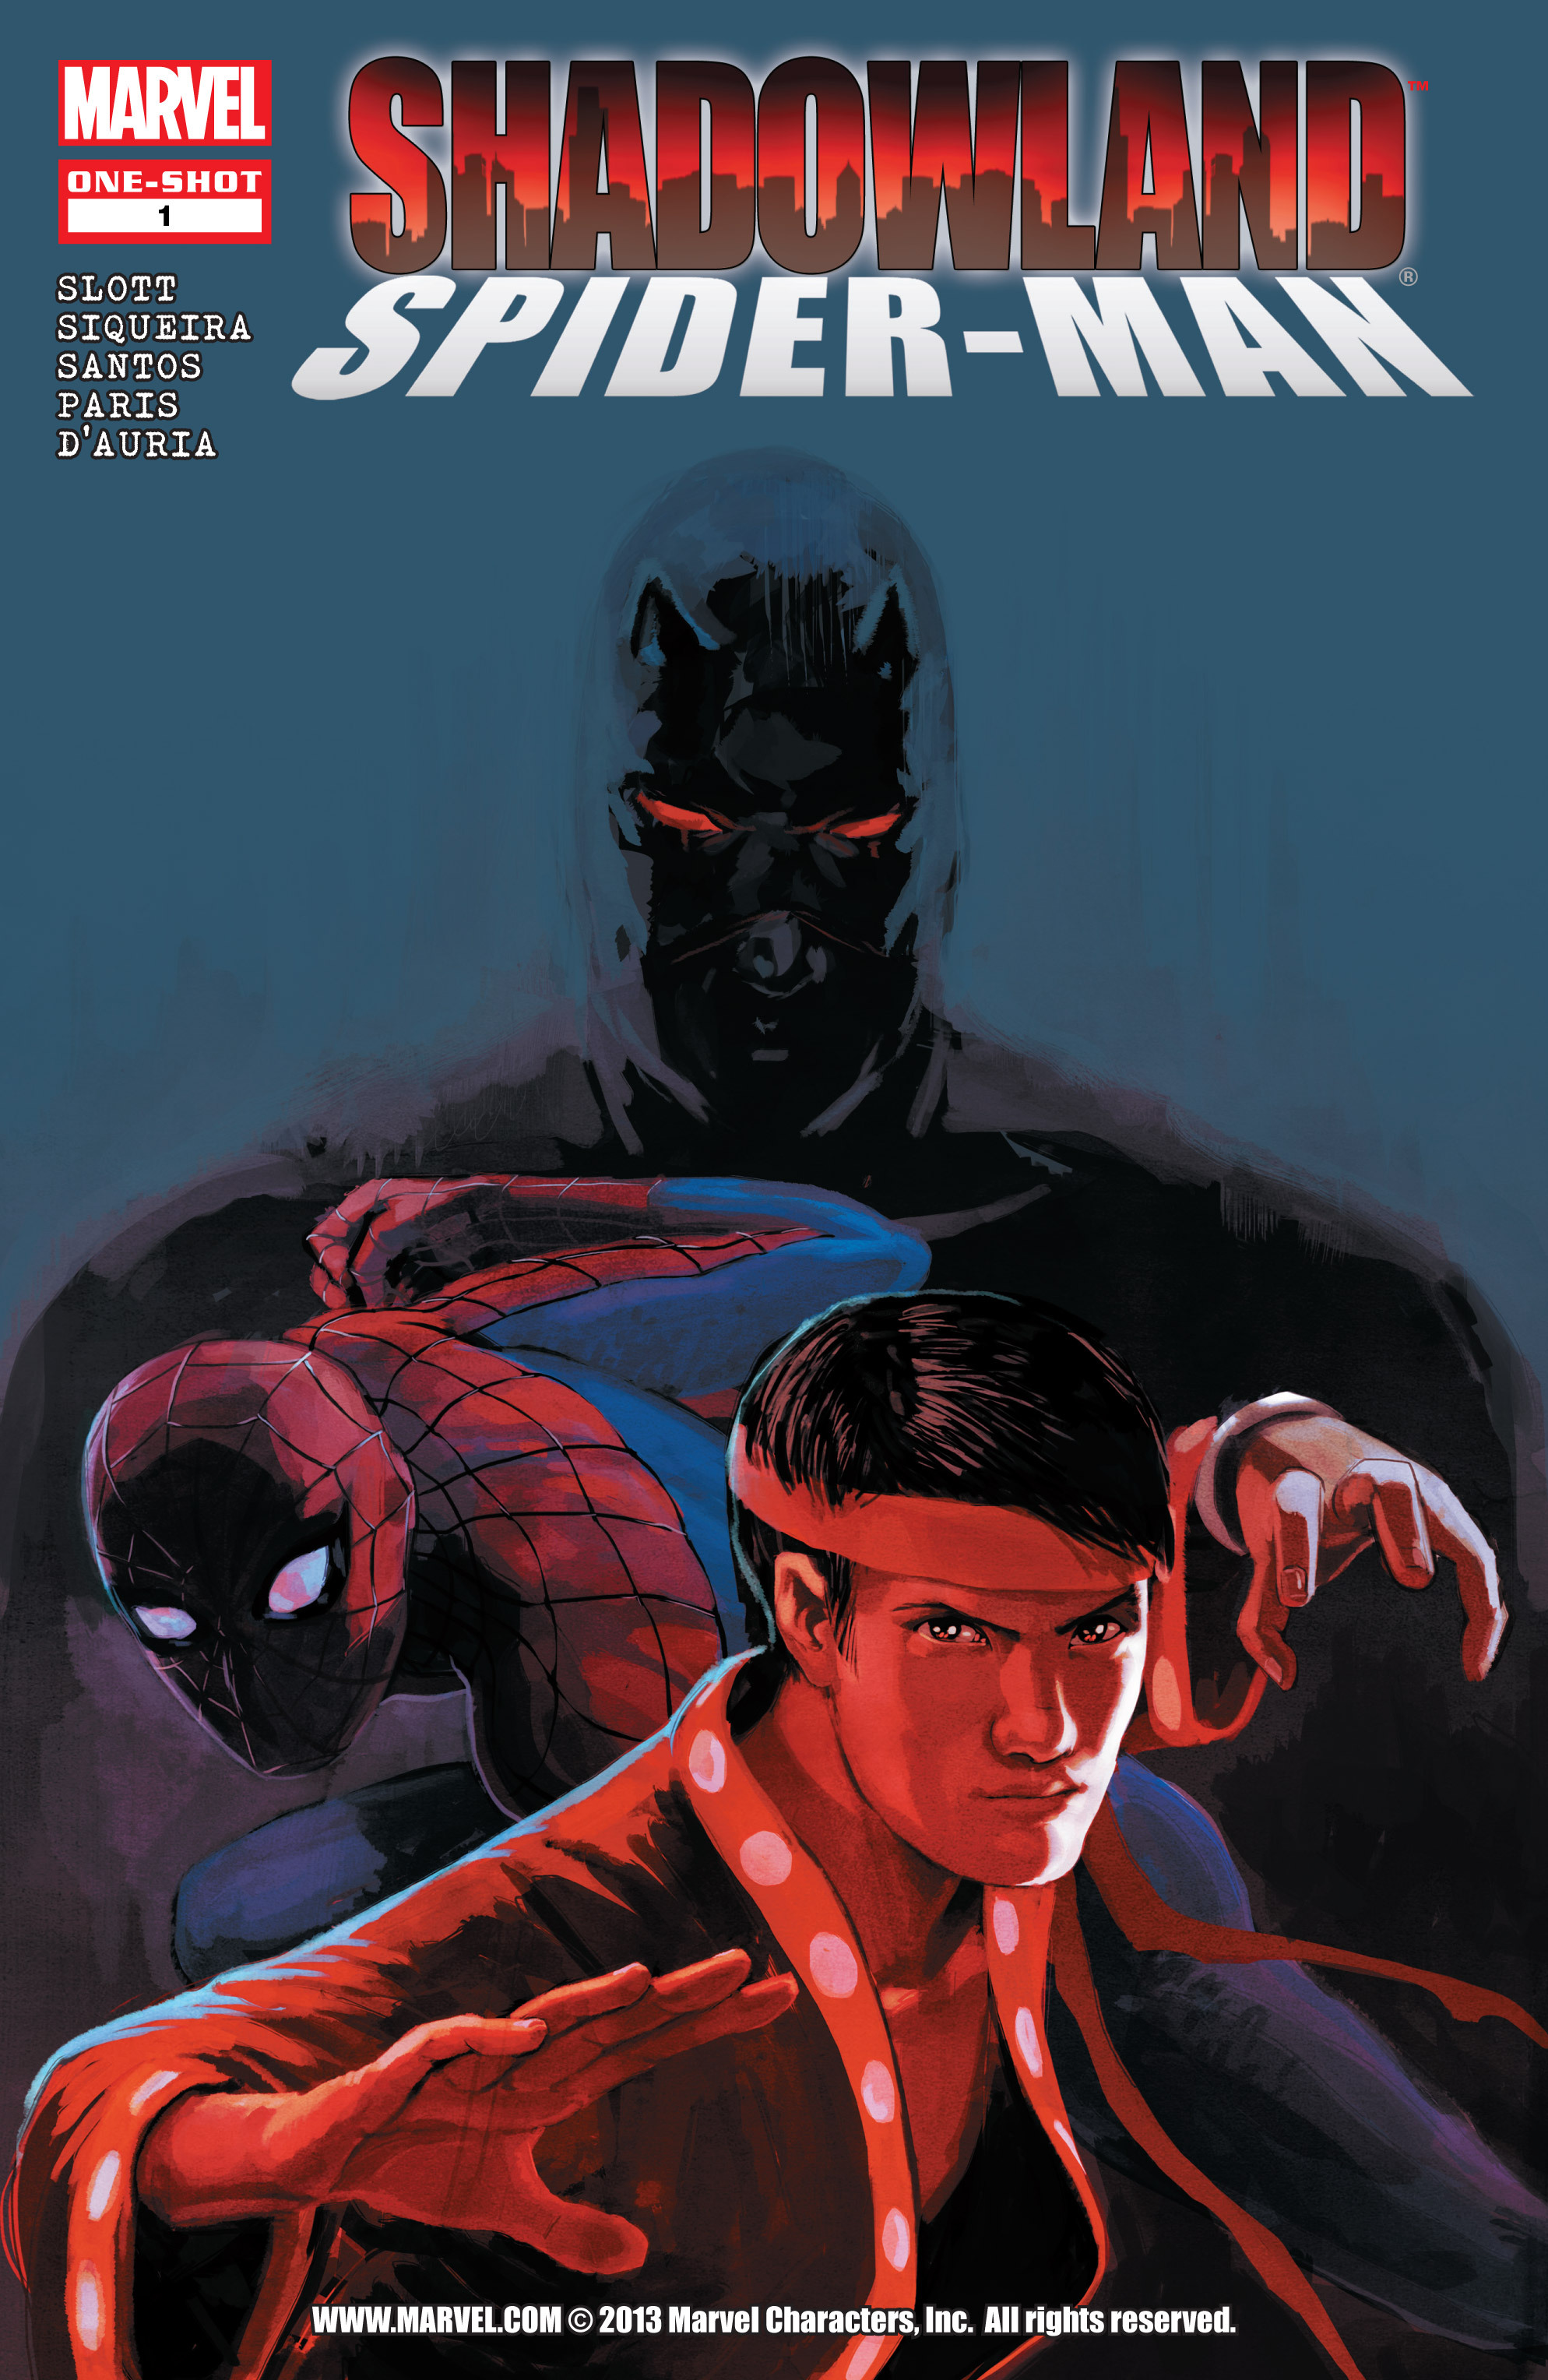 Read online Shadowland: Spider-Man comic -  Issue # Full - 1